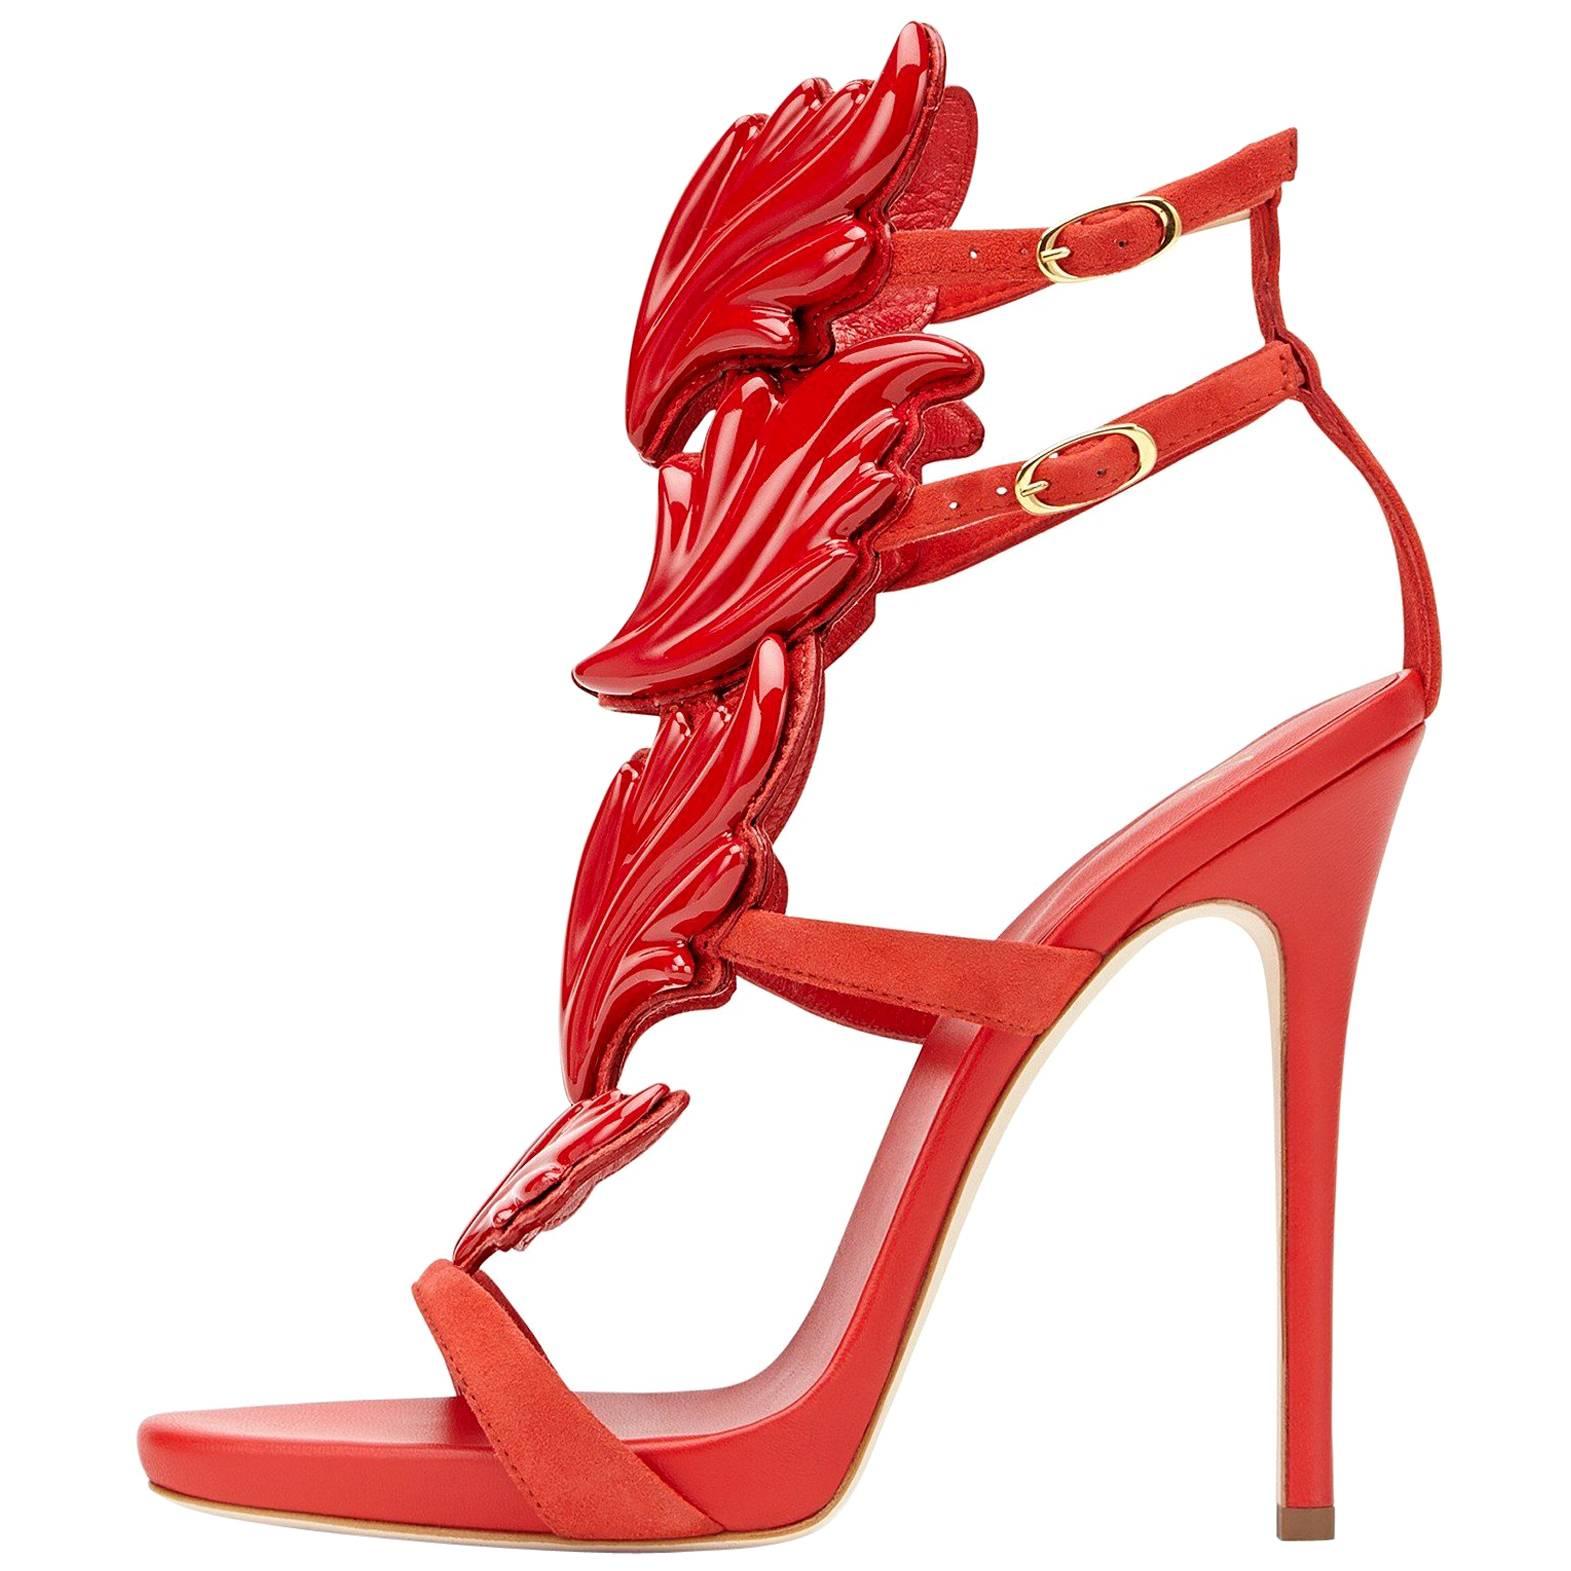 Giuseppe Zanotti New Red Suede Wing Evening Strappy Sandals Heels 